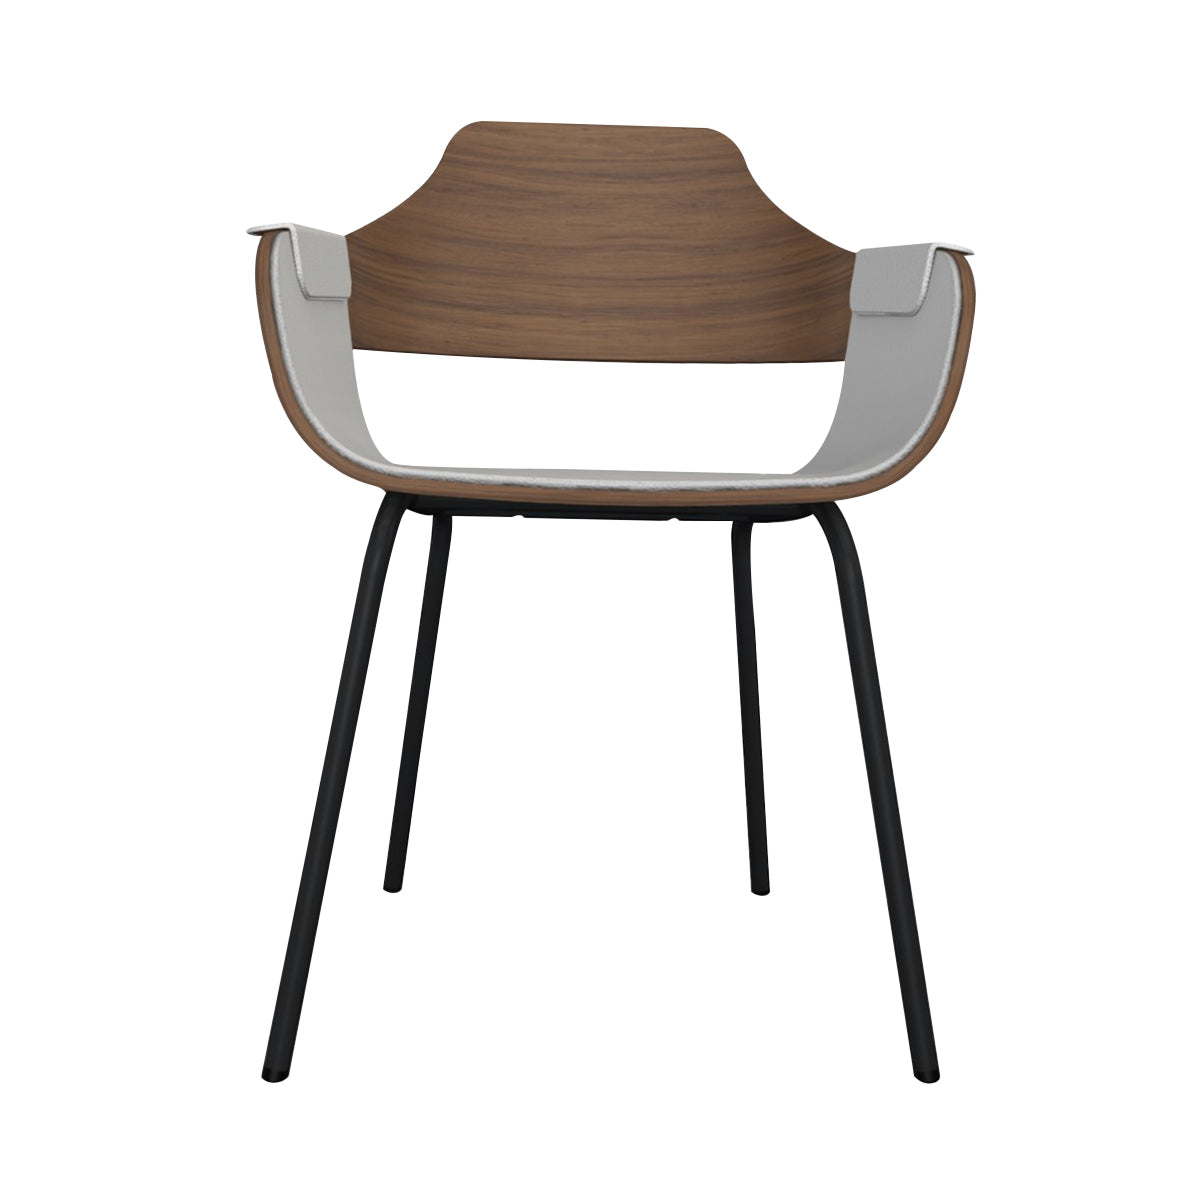 Showtime Chair with Metal Base: Interior Seat + Armrest Upholstered + Anthracite Grey